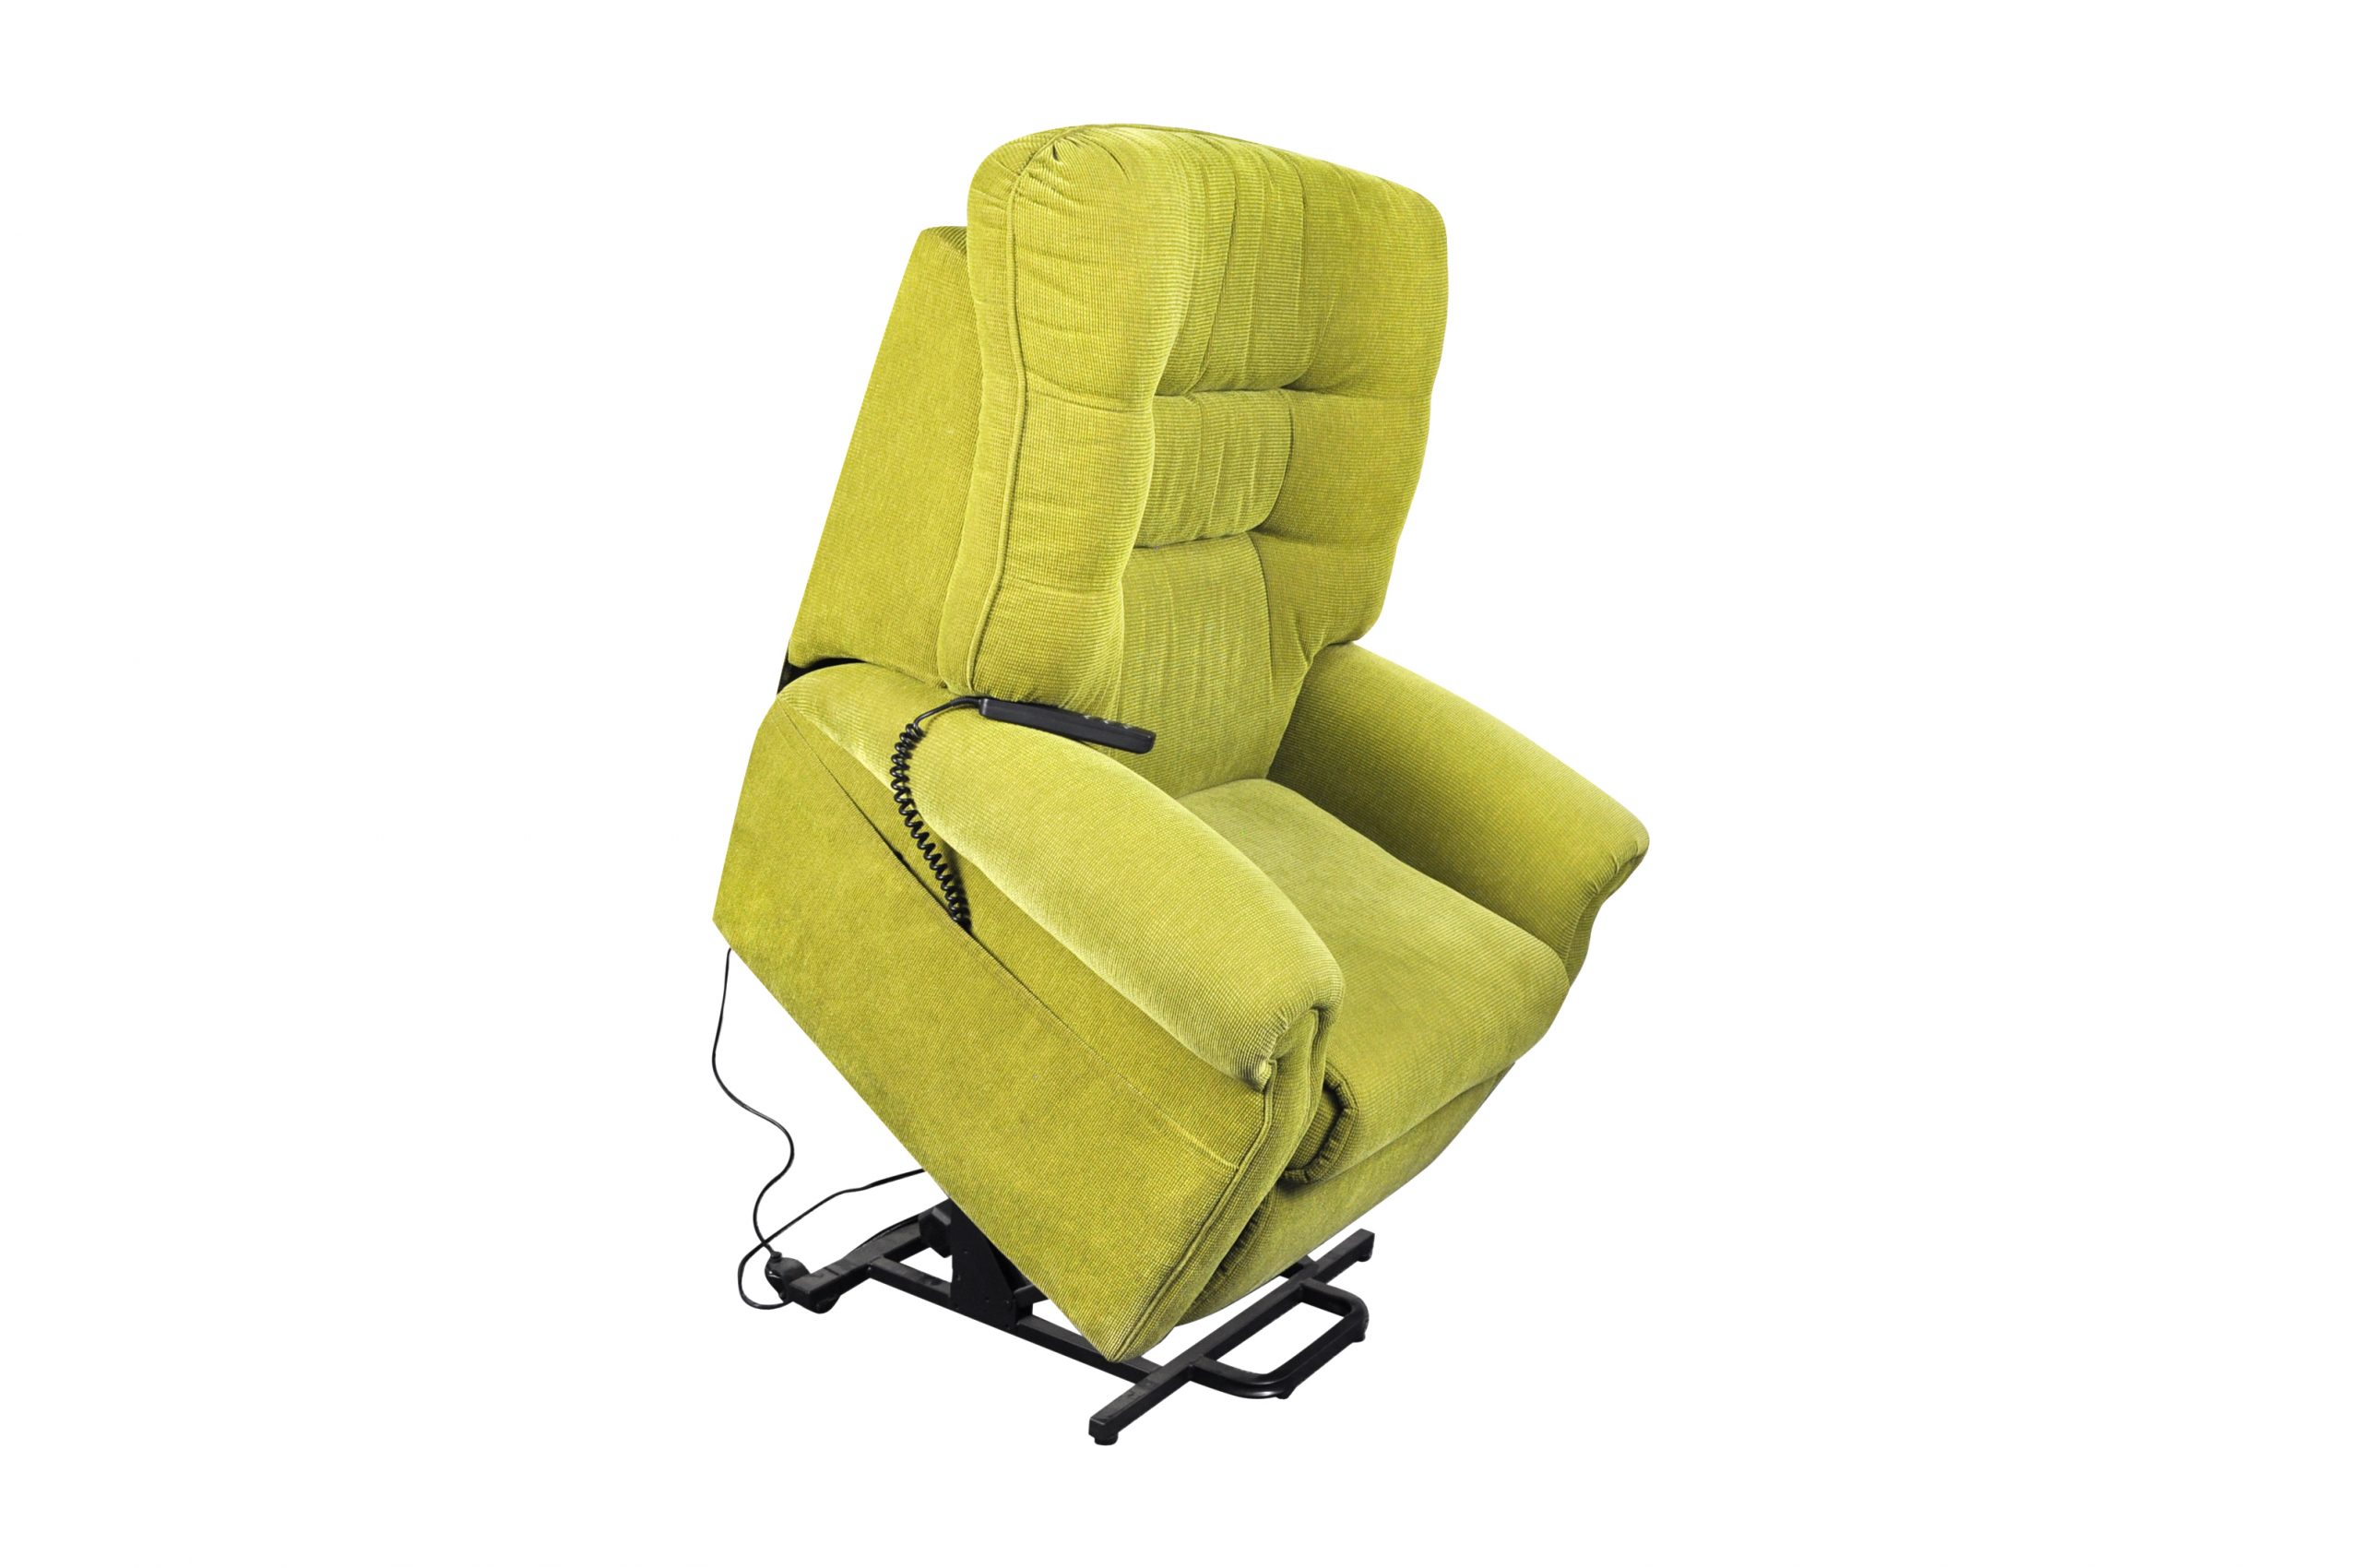  Bardot - Lift Only Chair (Large)